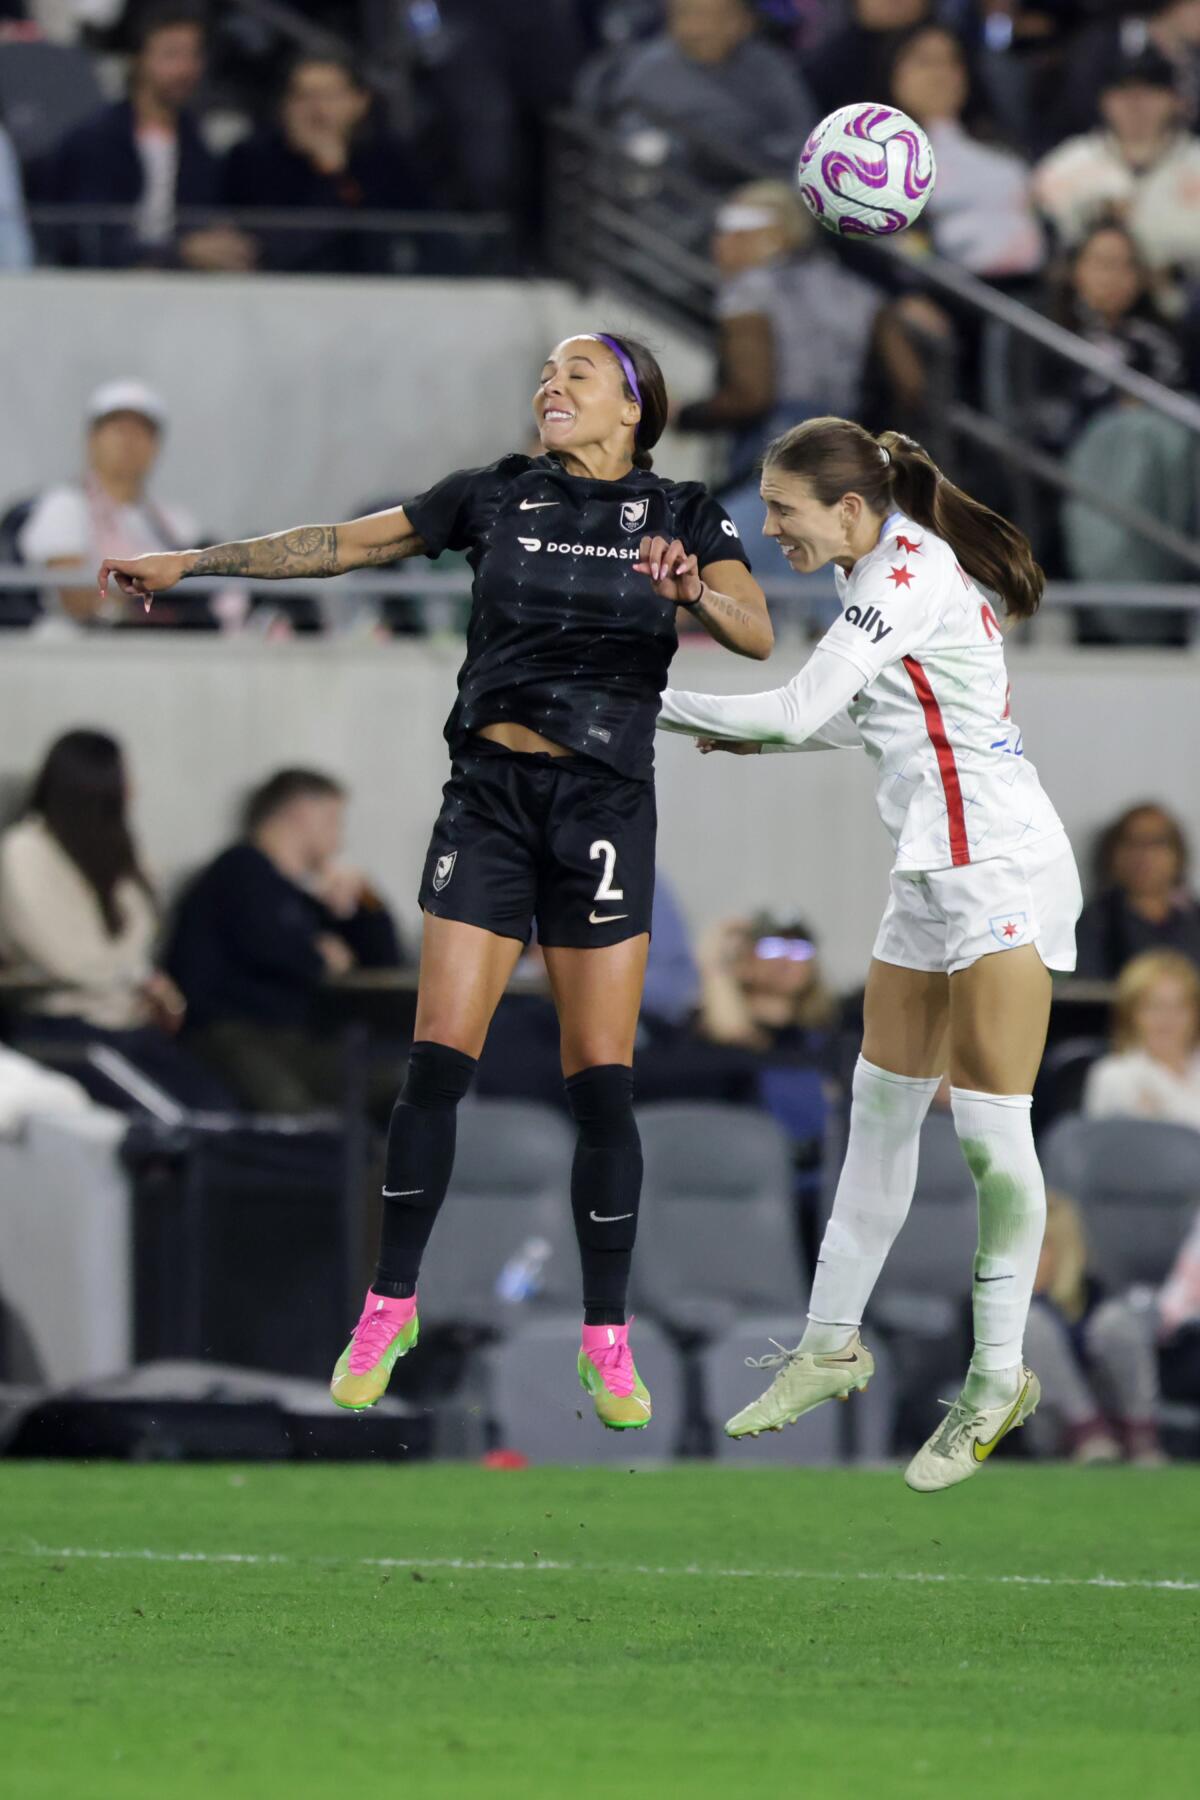 Angel City FC's Sydney Leroux and Chicago Red Stars' Tatumn Milazzo fight for head the ball.